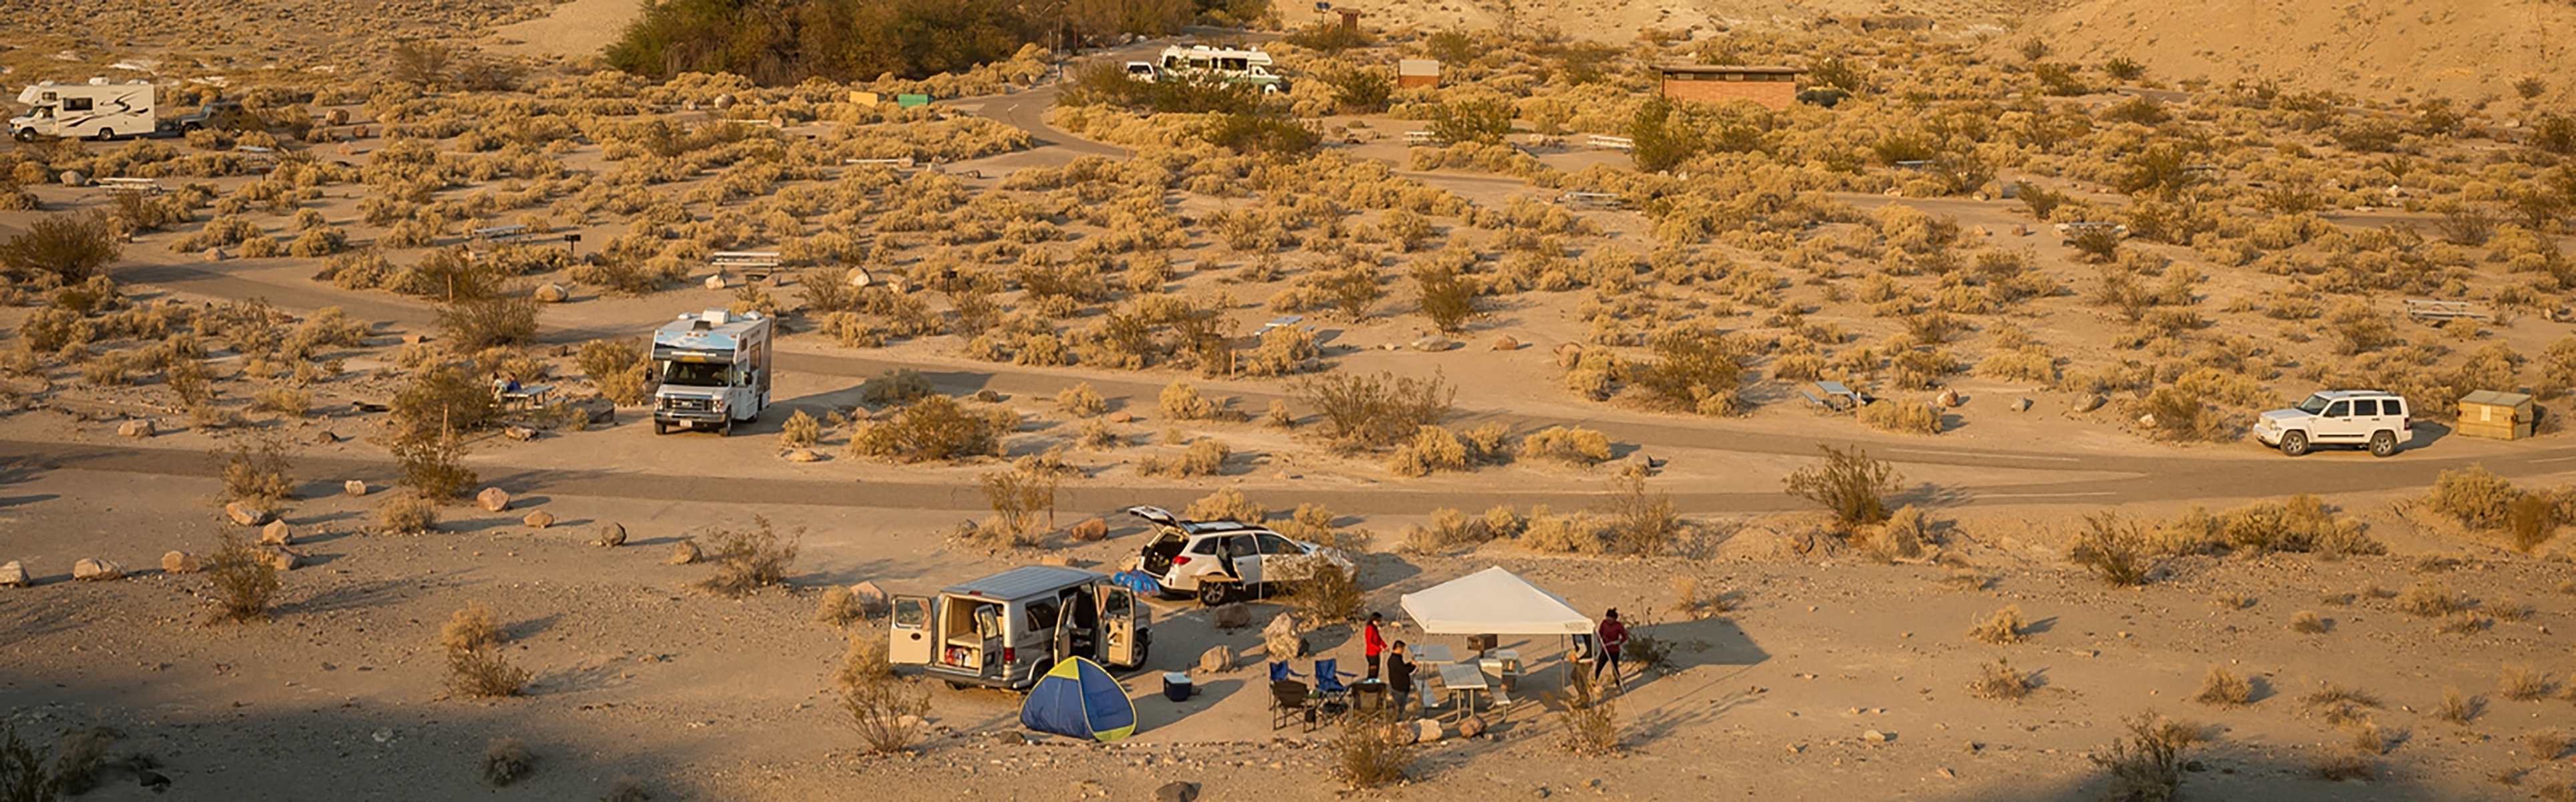 Desert landscape with occupied tent and RV camsite throughout the brush.